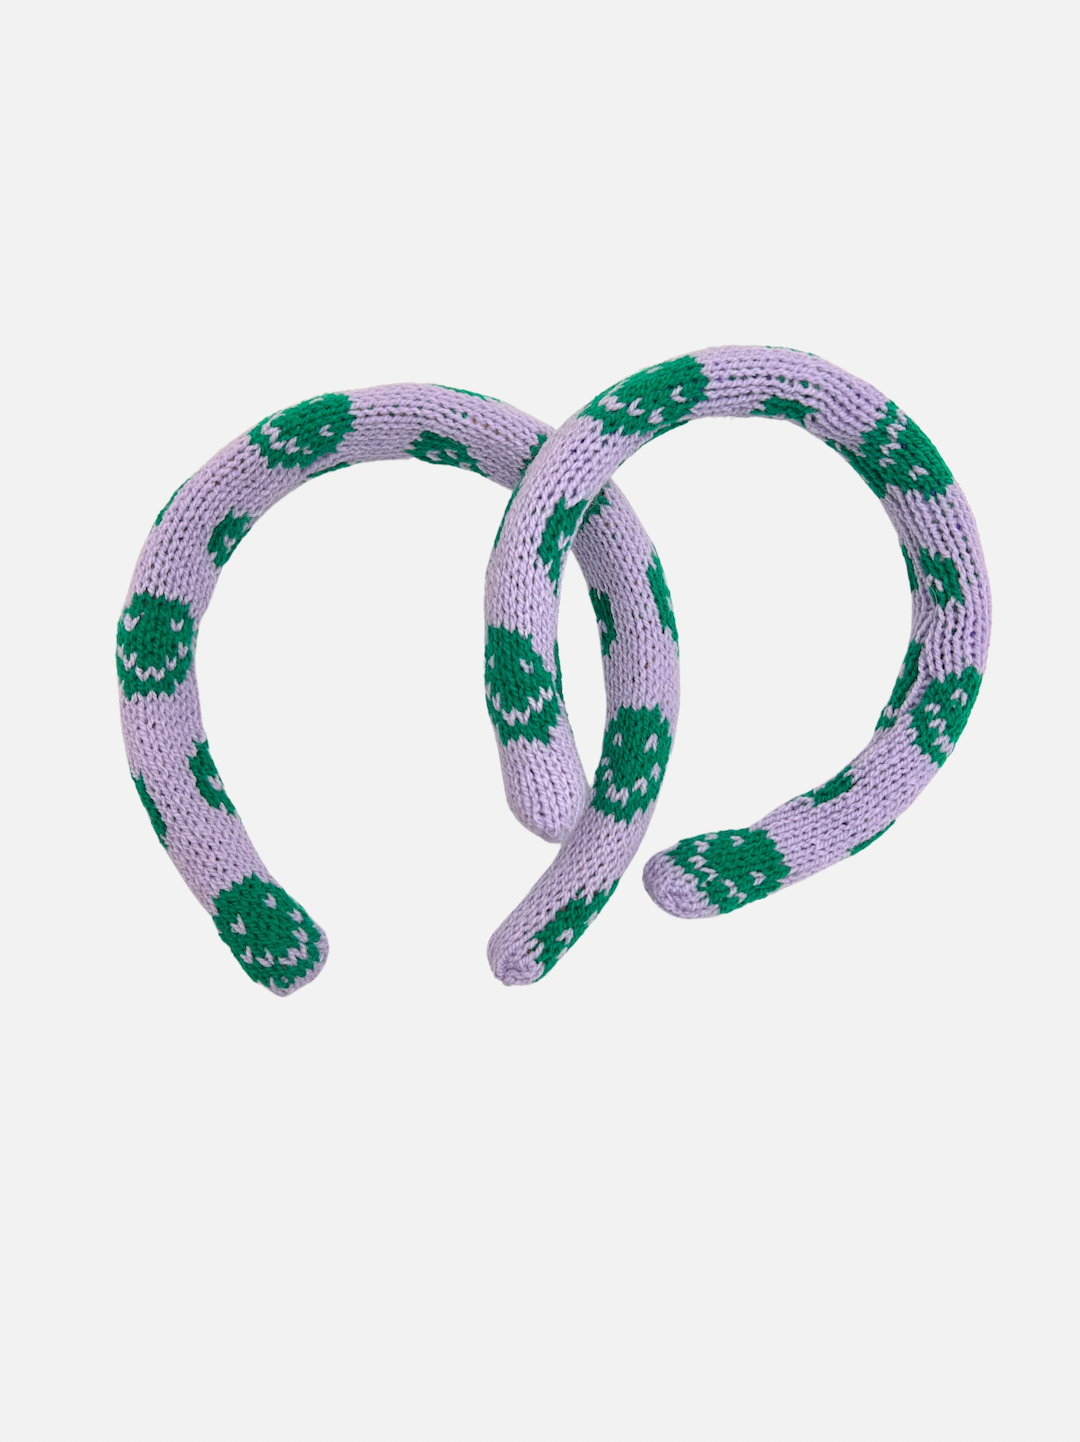 Two sizes of kids' knitted headband with green smileys on a purple background